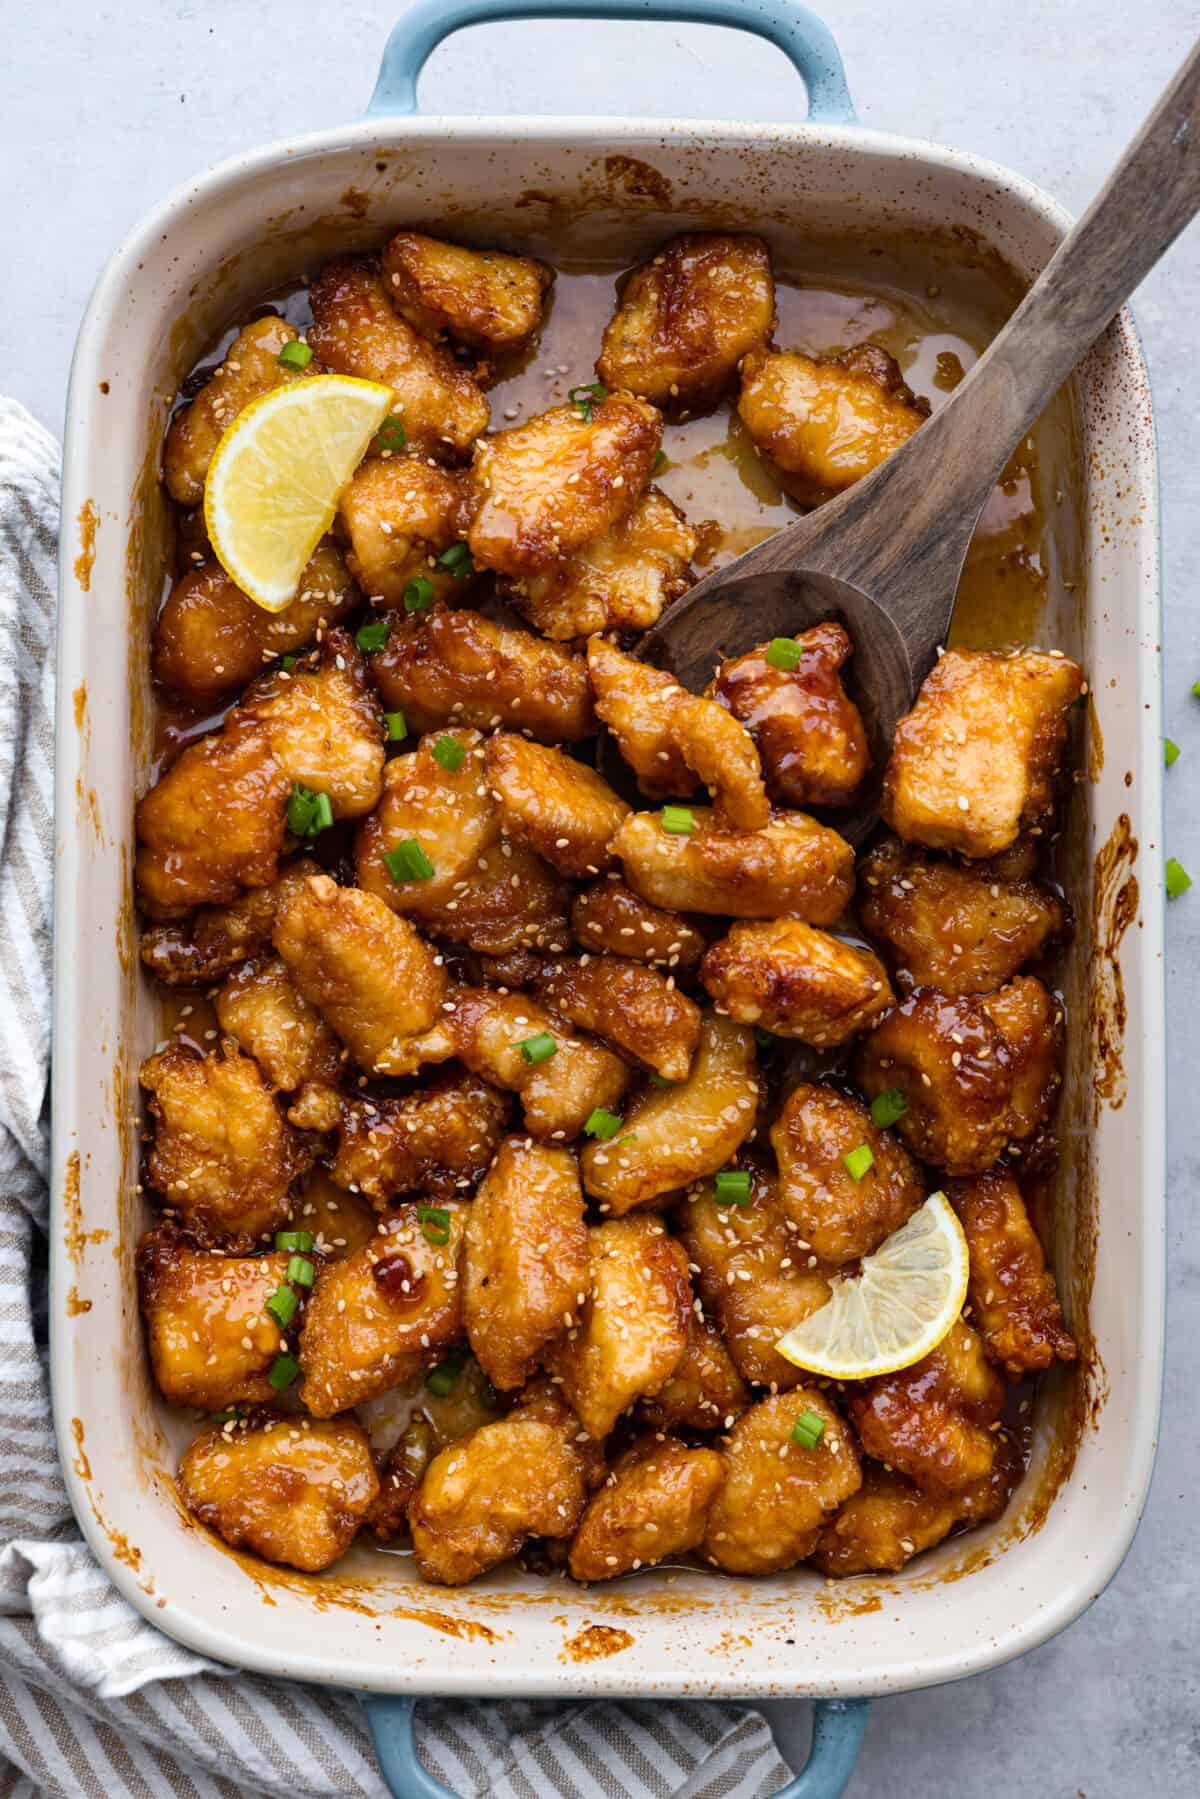 Chinese lemon chicken in a blue and white casserole dish.